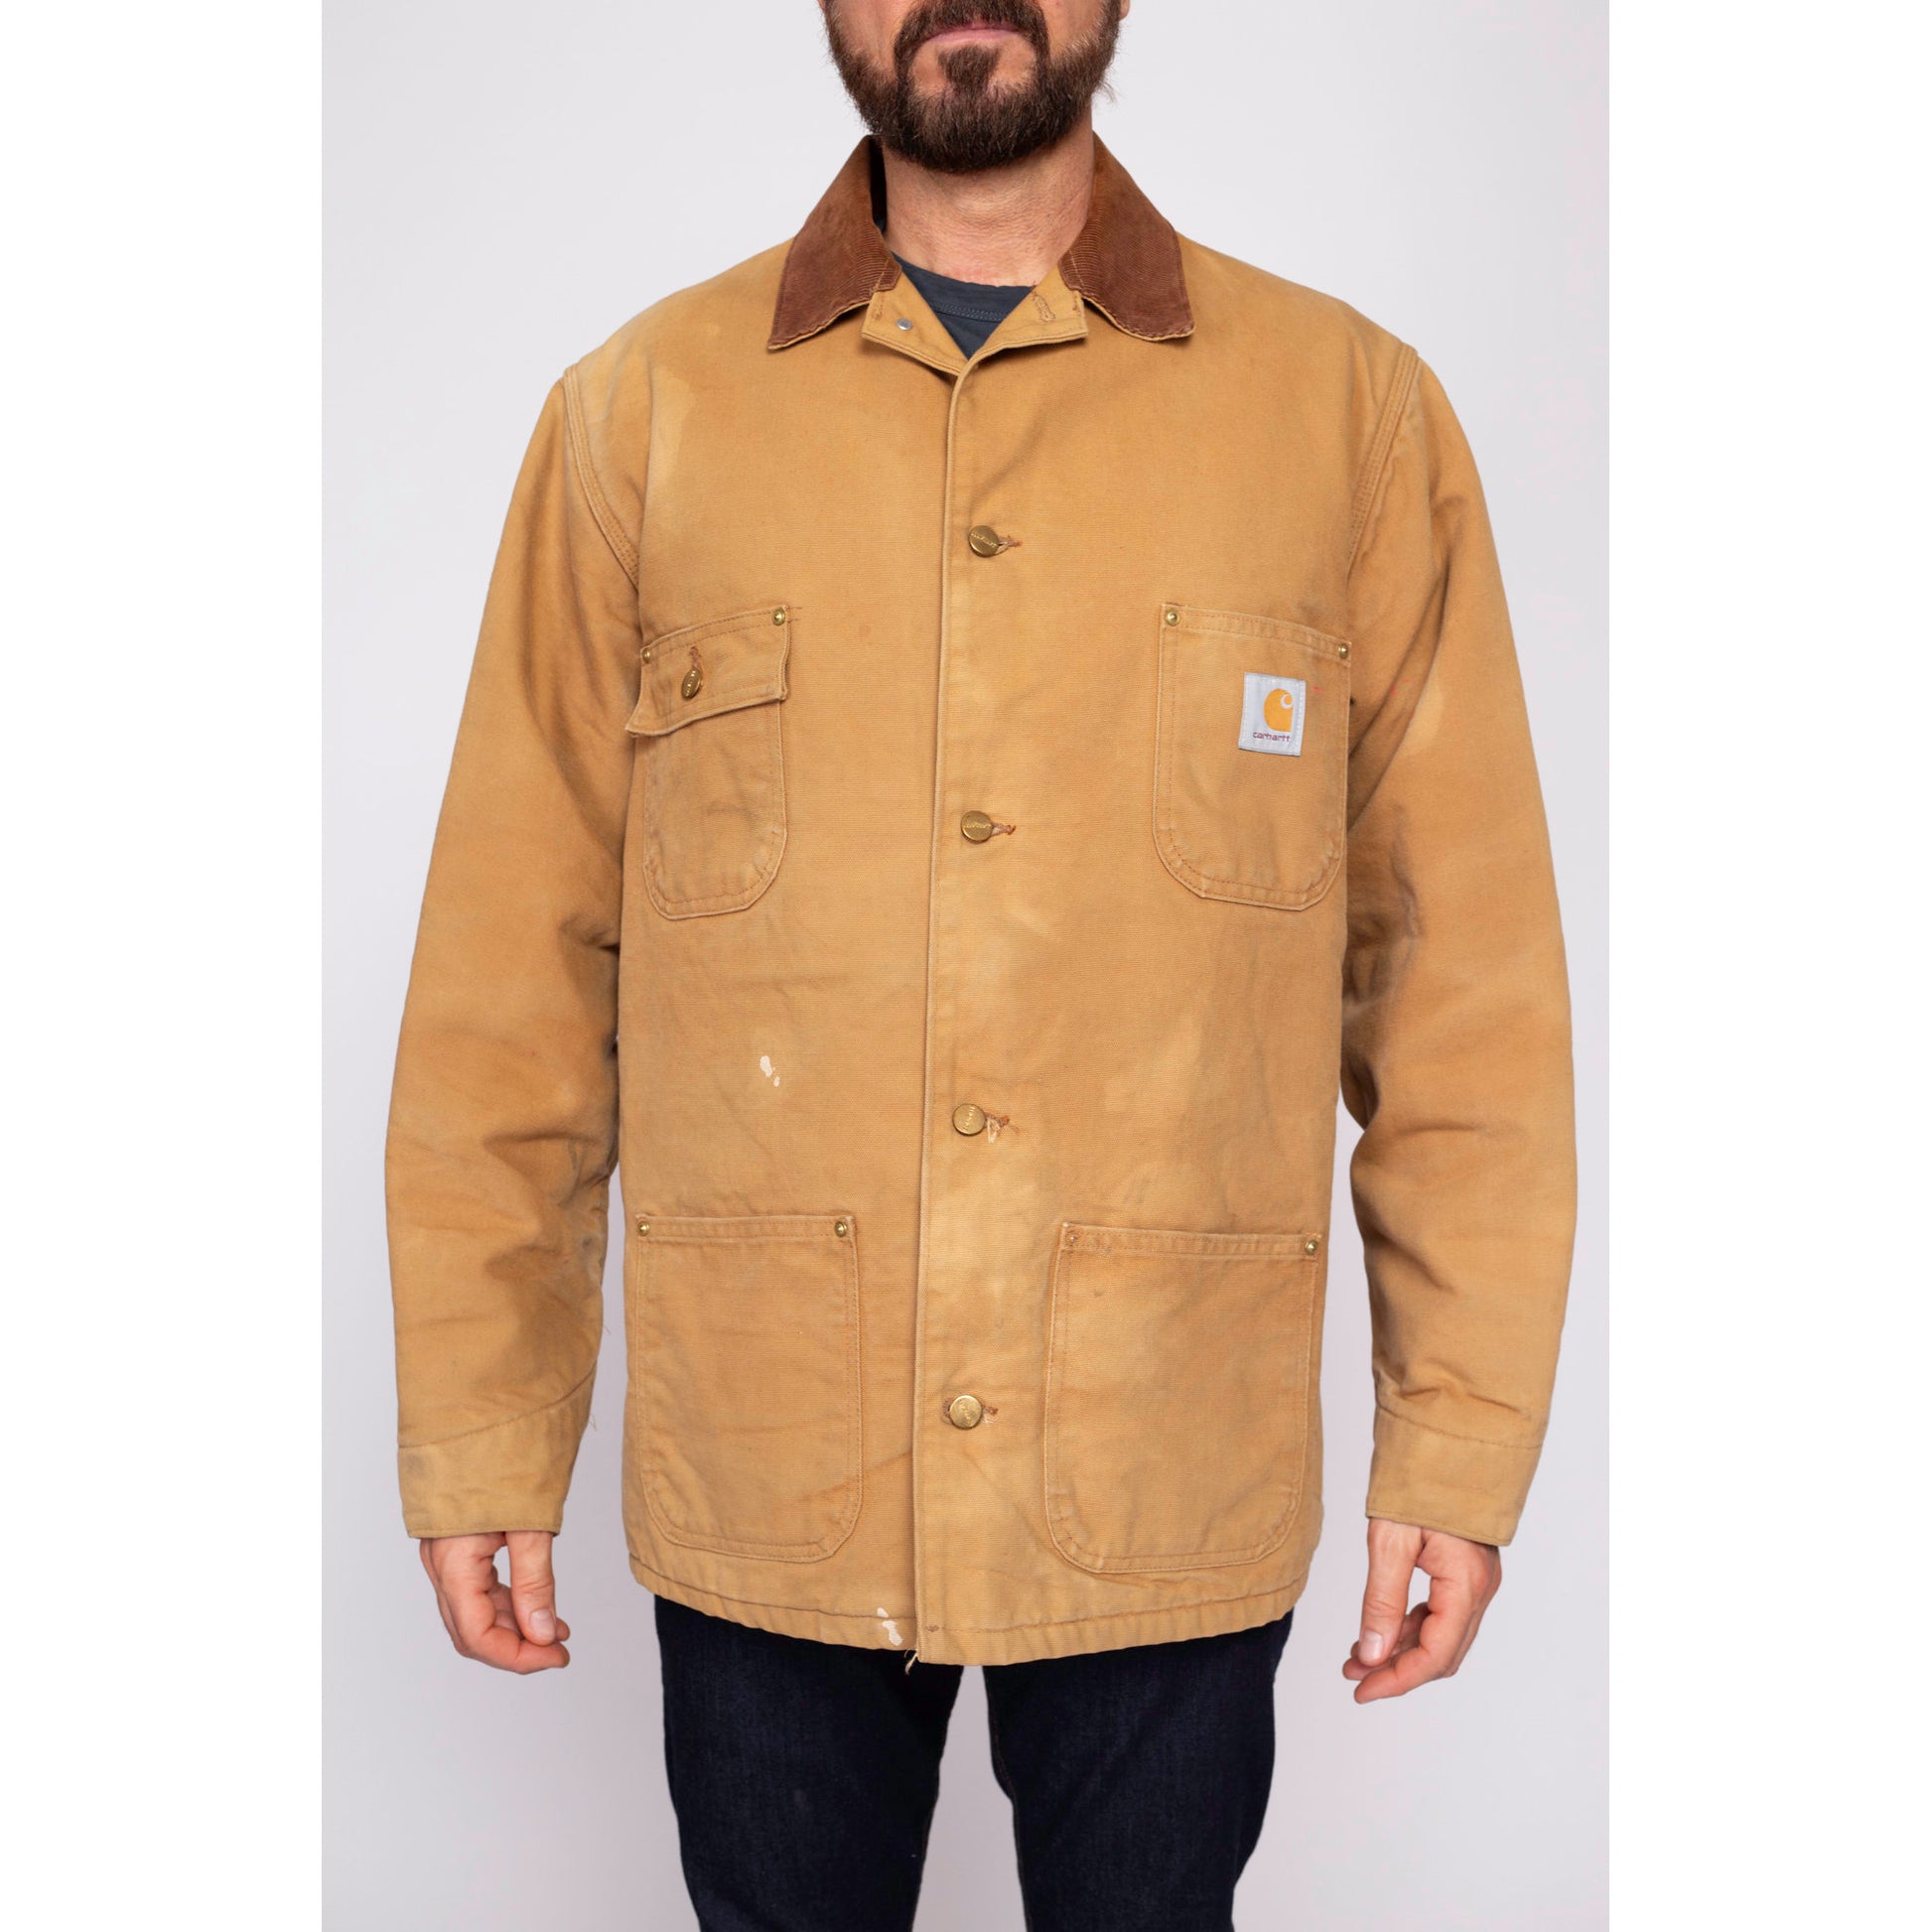 Vintage Carhartt Blanket Lined Chore Coat - 44 Tall | 90s Tan Canvas Duck Corduroy Collar Union Made Workwear Jacket